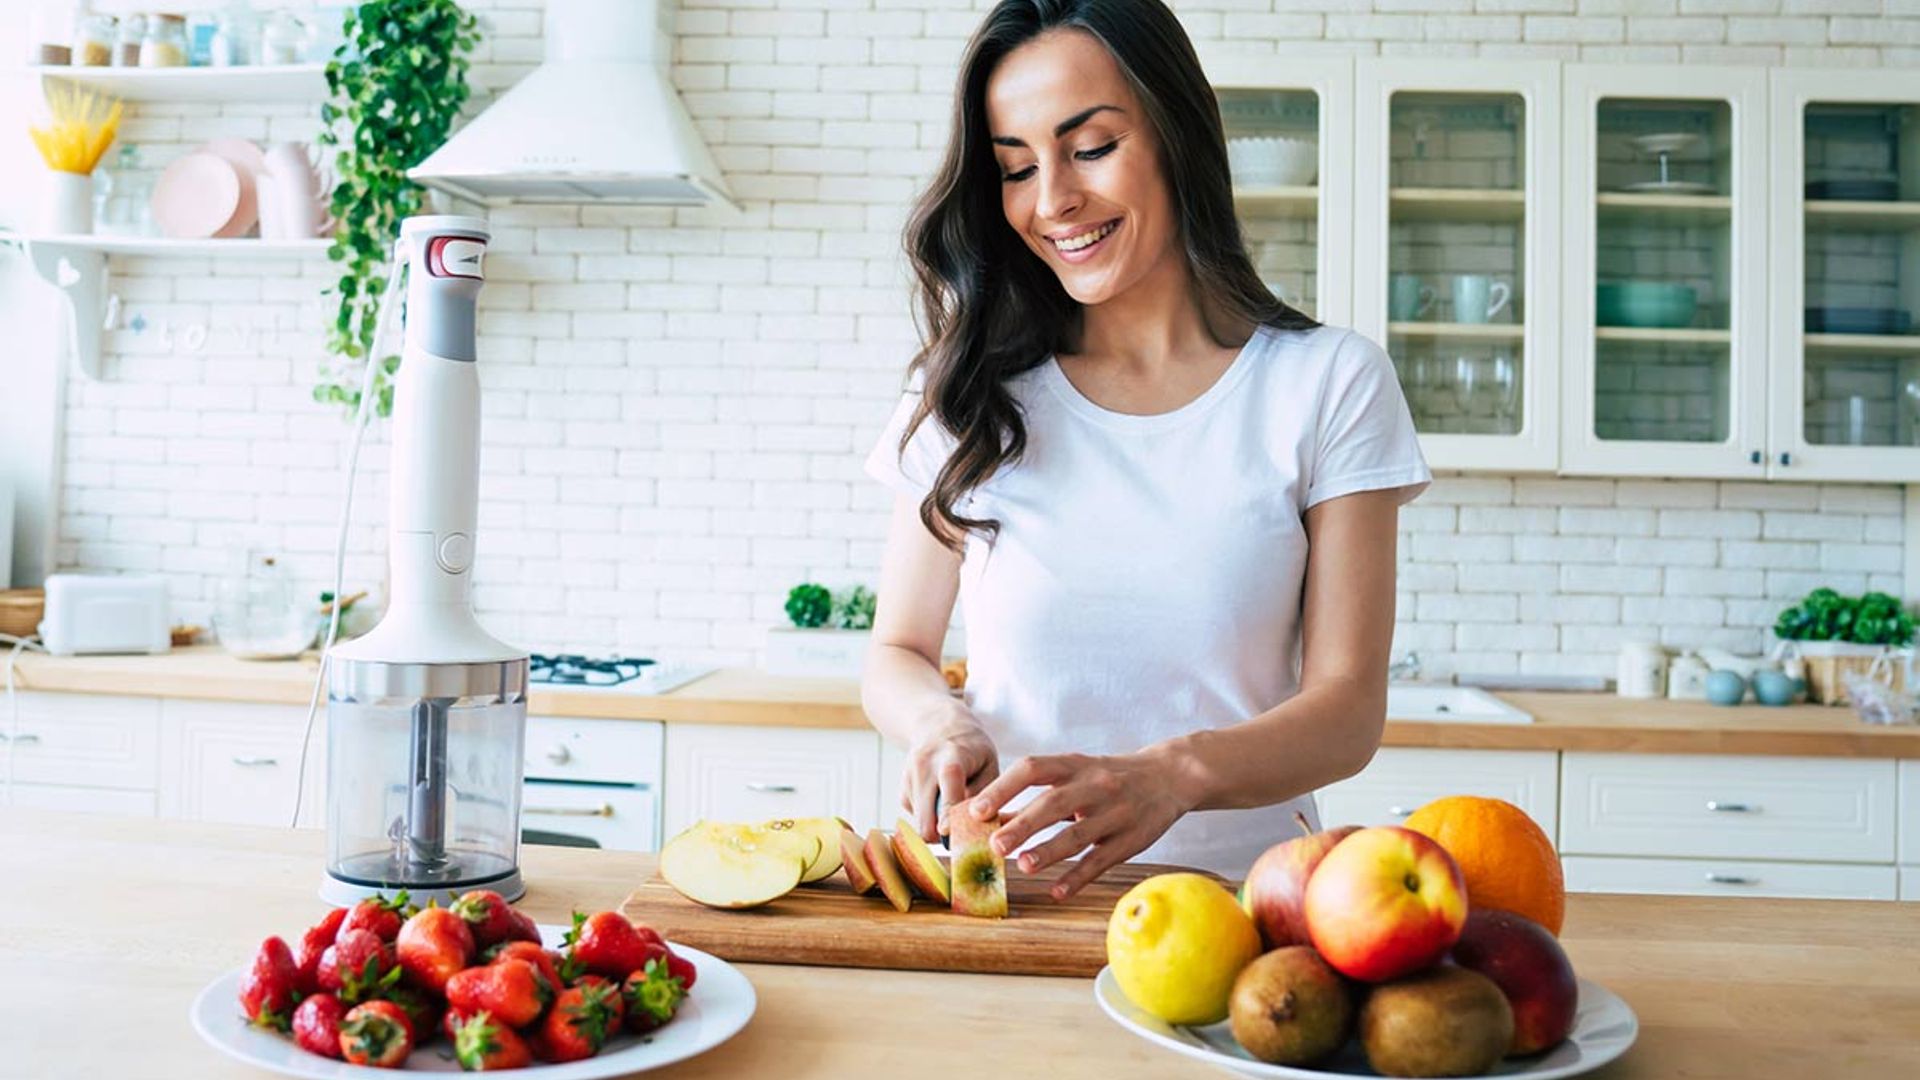 7 weight loss gadgets for the kitchen 2022: From a Spiralizer to an AirFryer, the Nutribullet & more